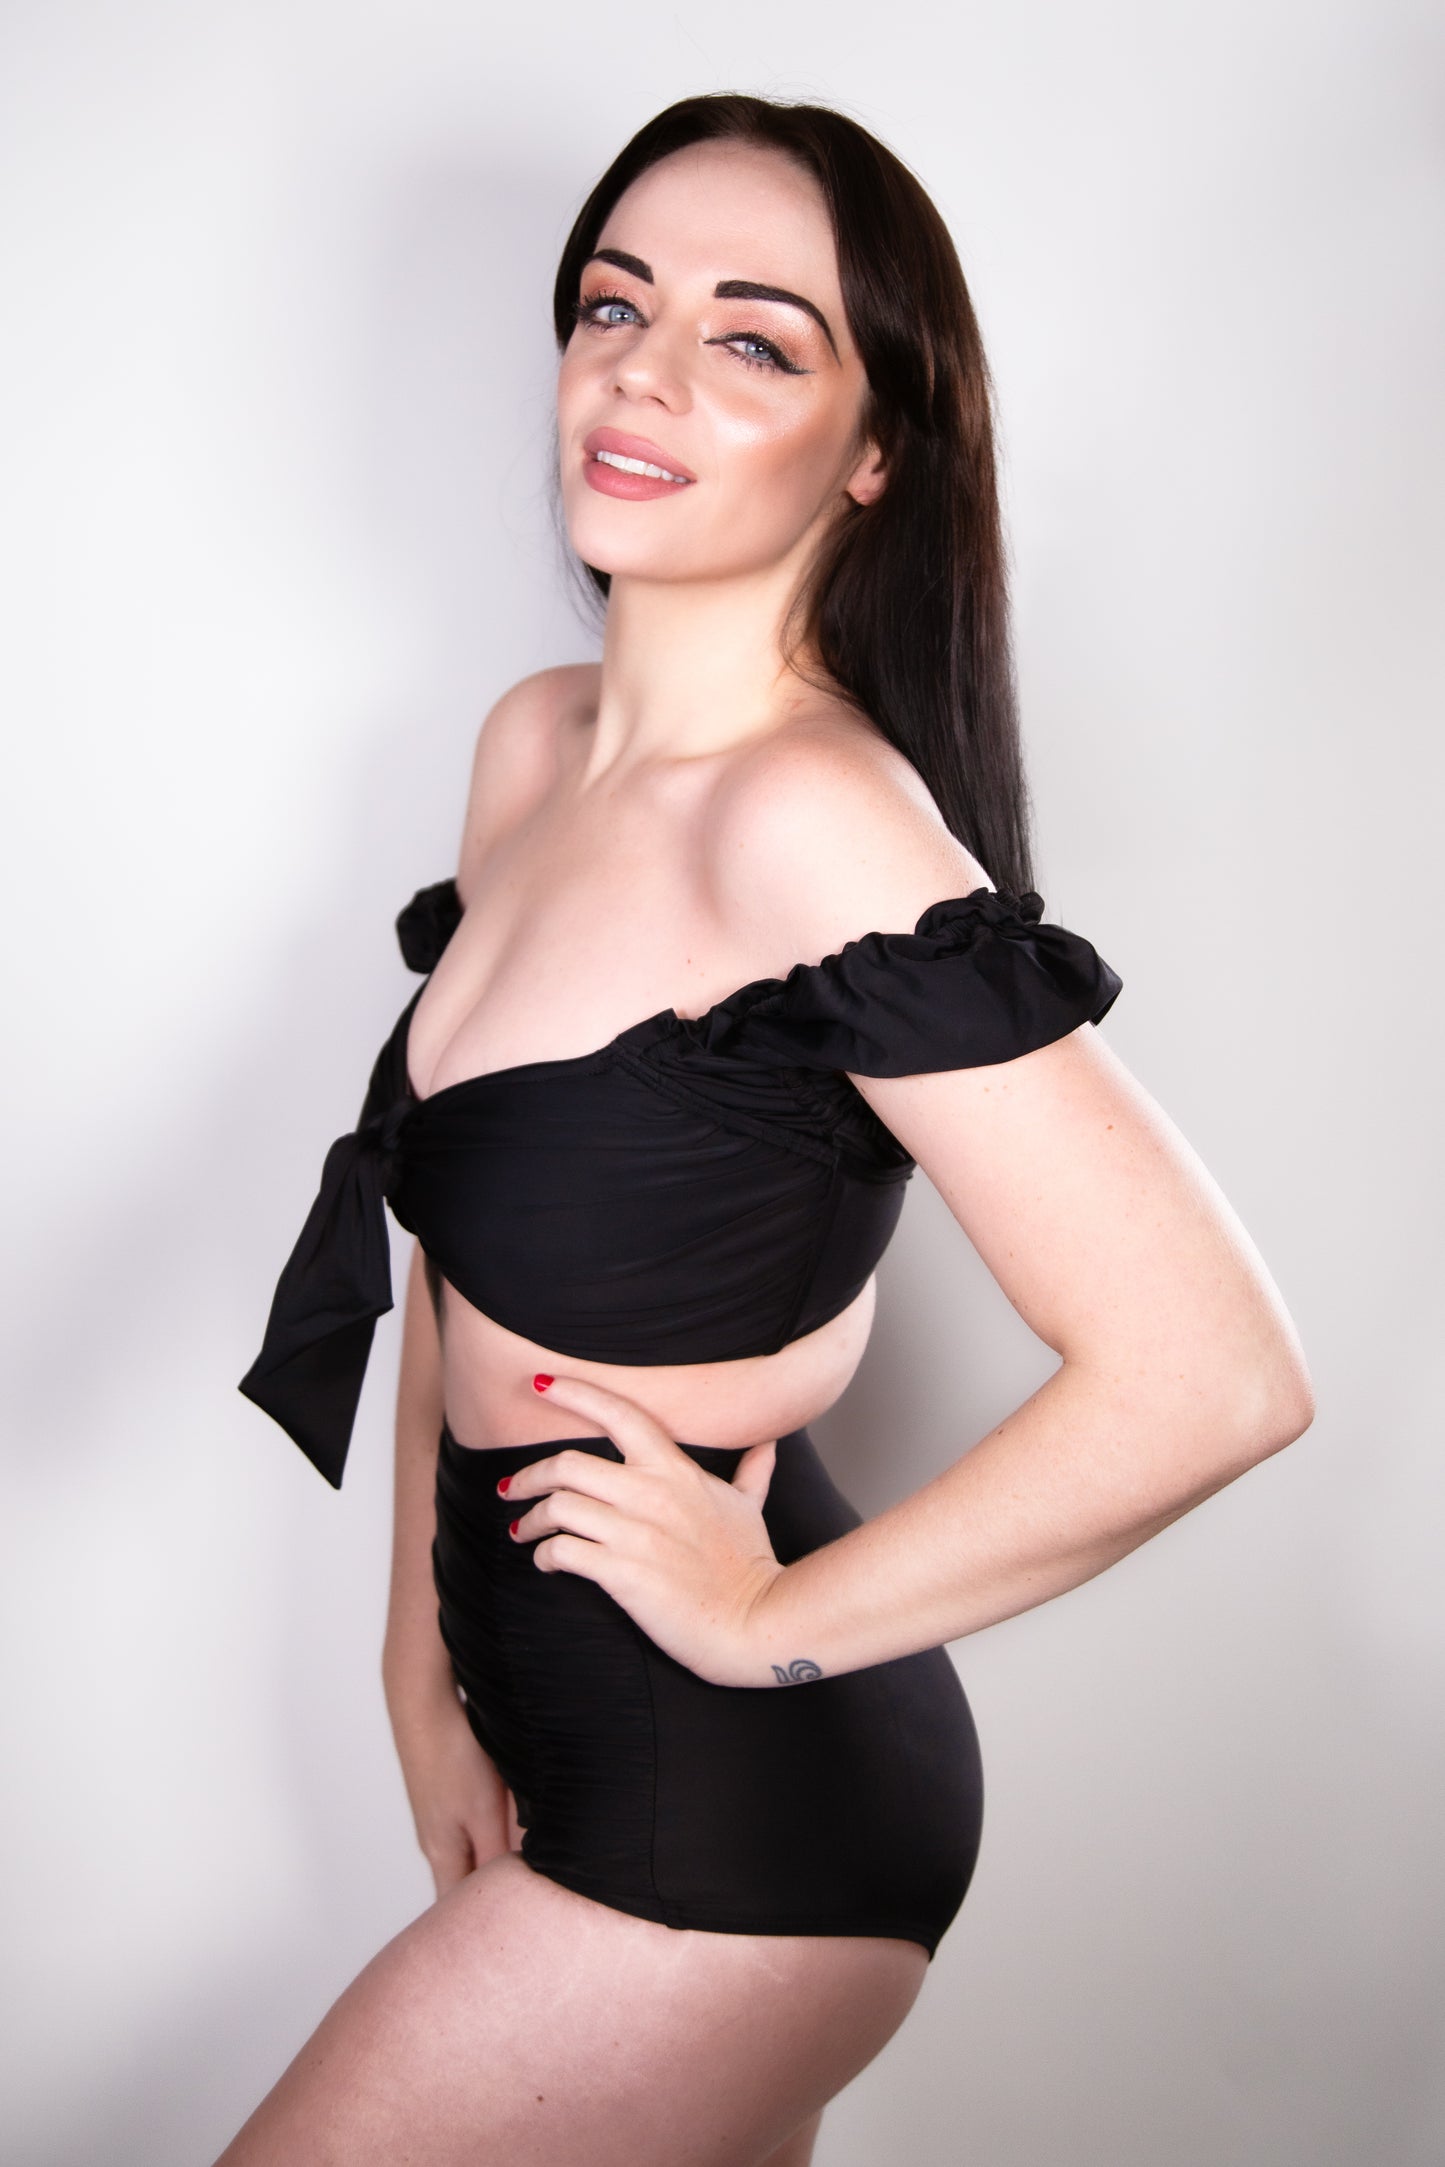 Ruffled and Ruched Black Bikini By Unique Vintage - sizes XS-3X